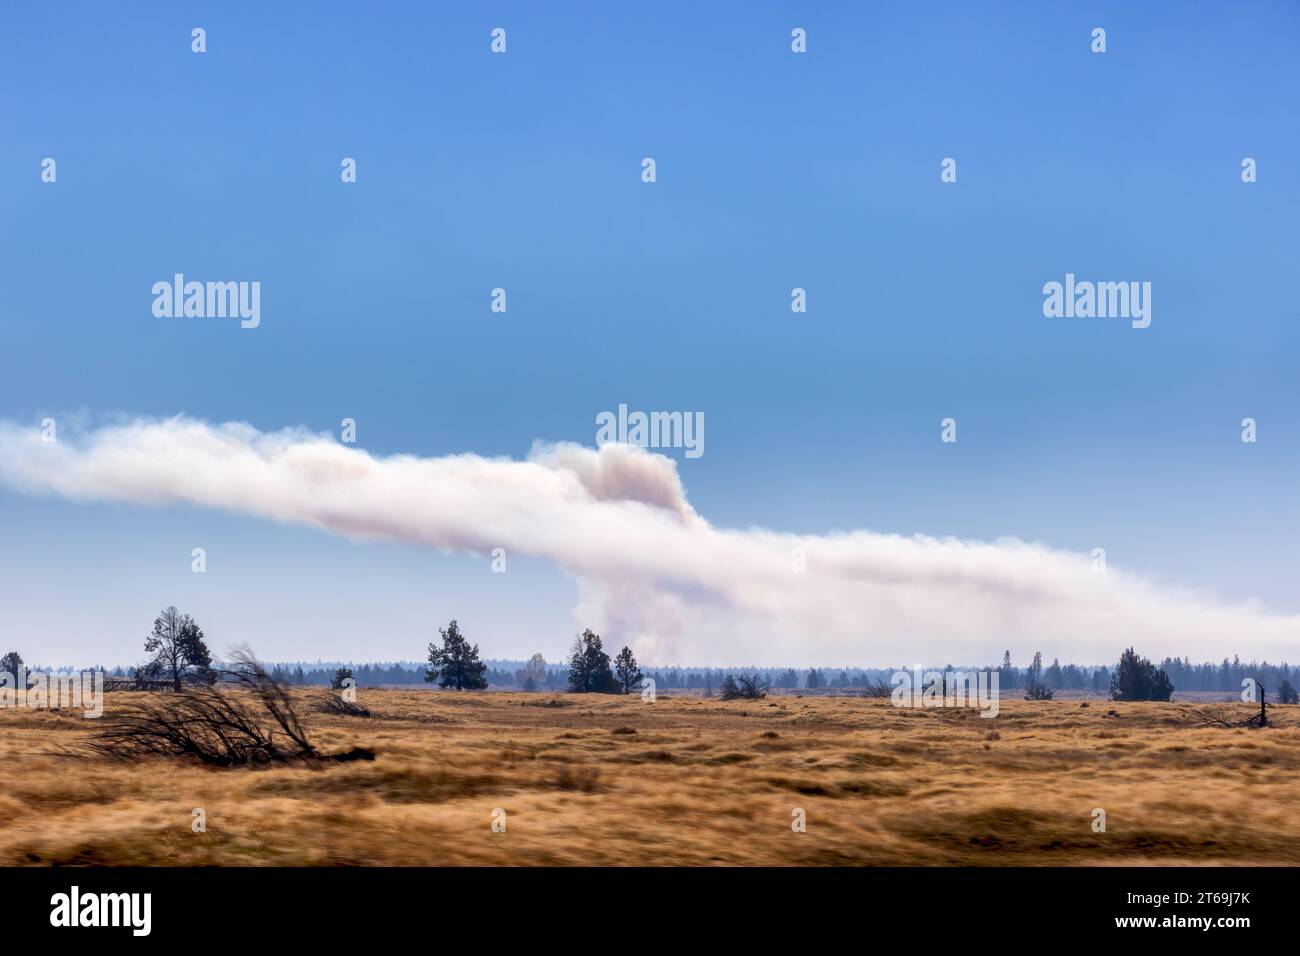 From a moving car, a controlled burn can be seen off in the distance from highway 26 in eastern Oregon, USA. Stock Photo